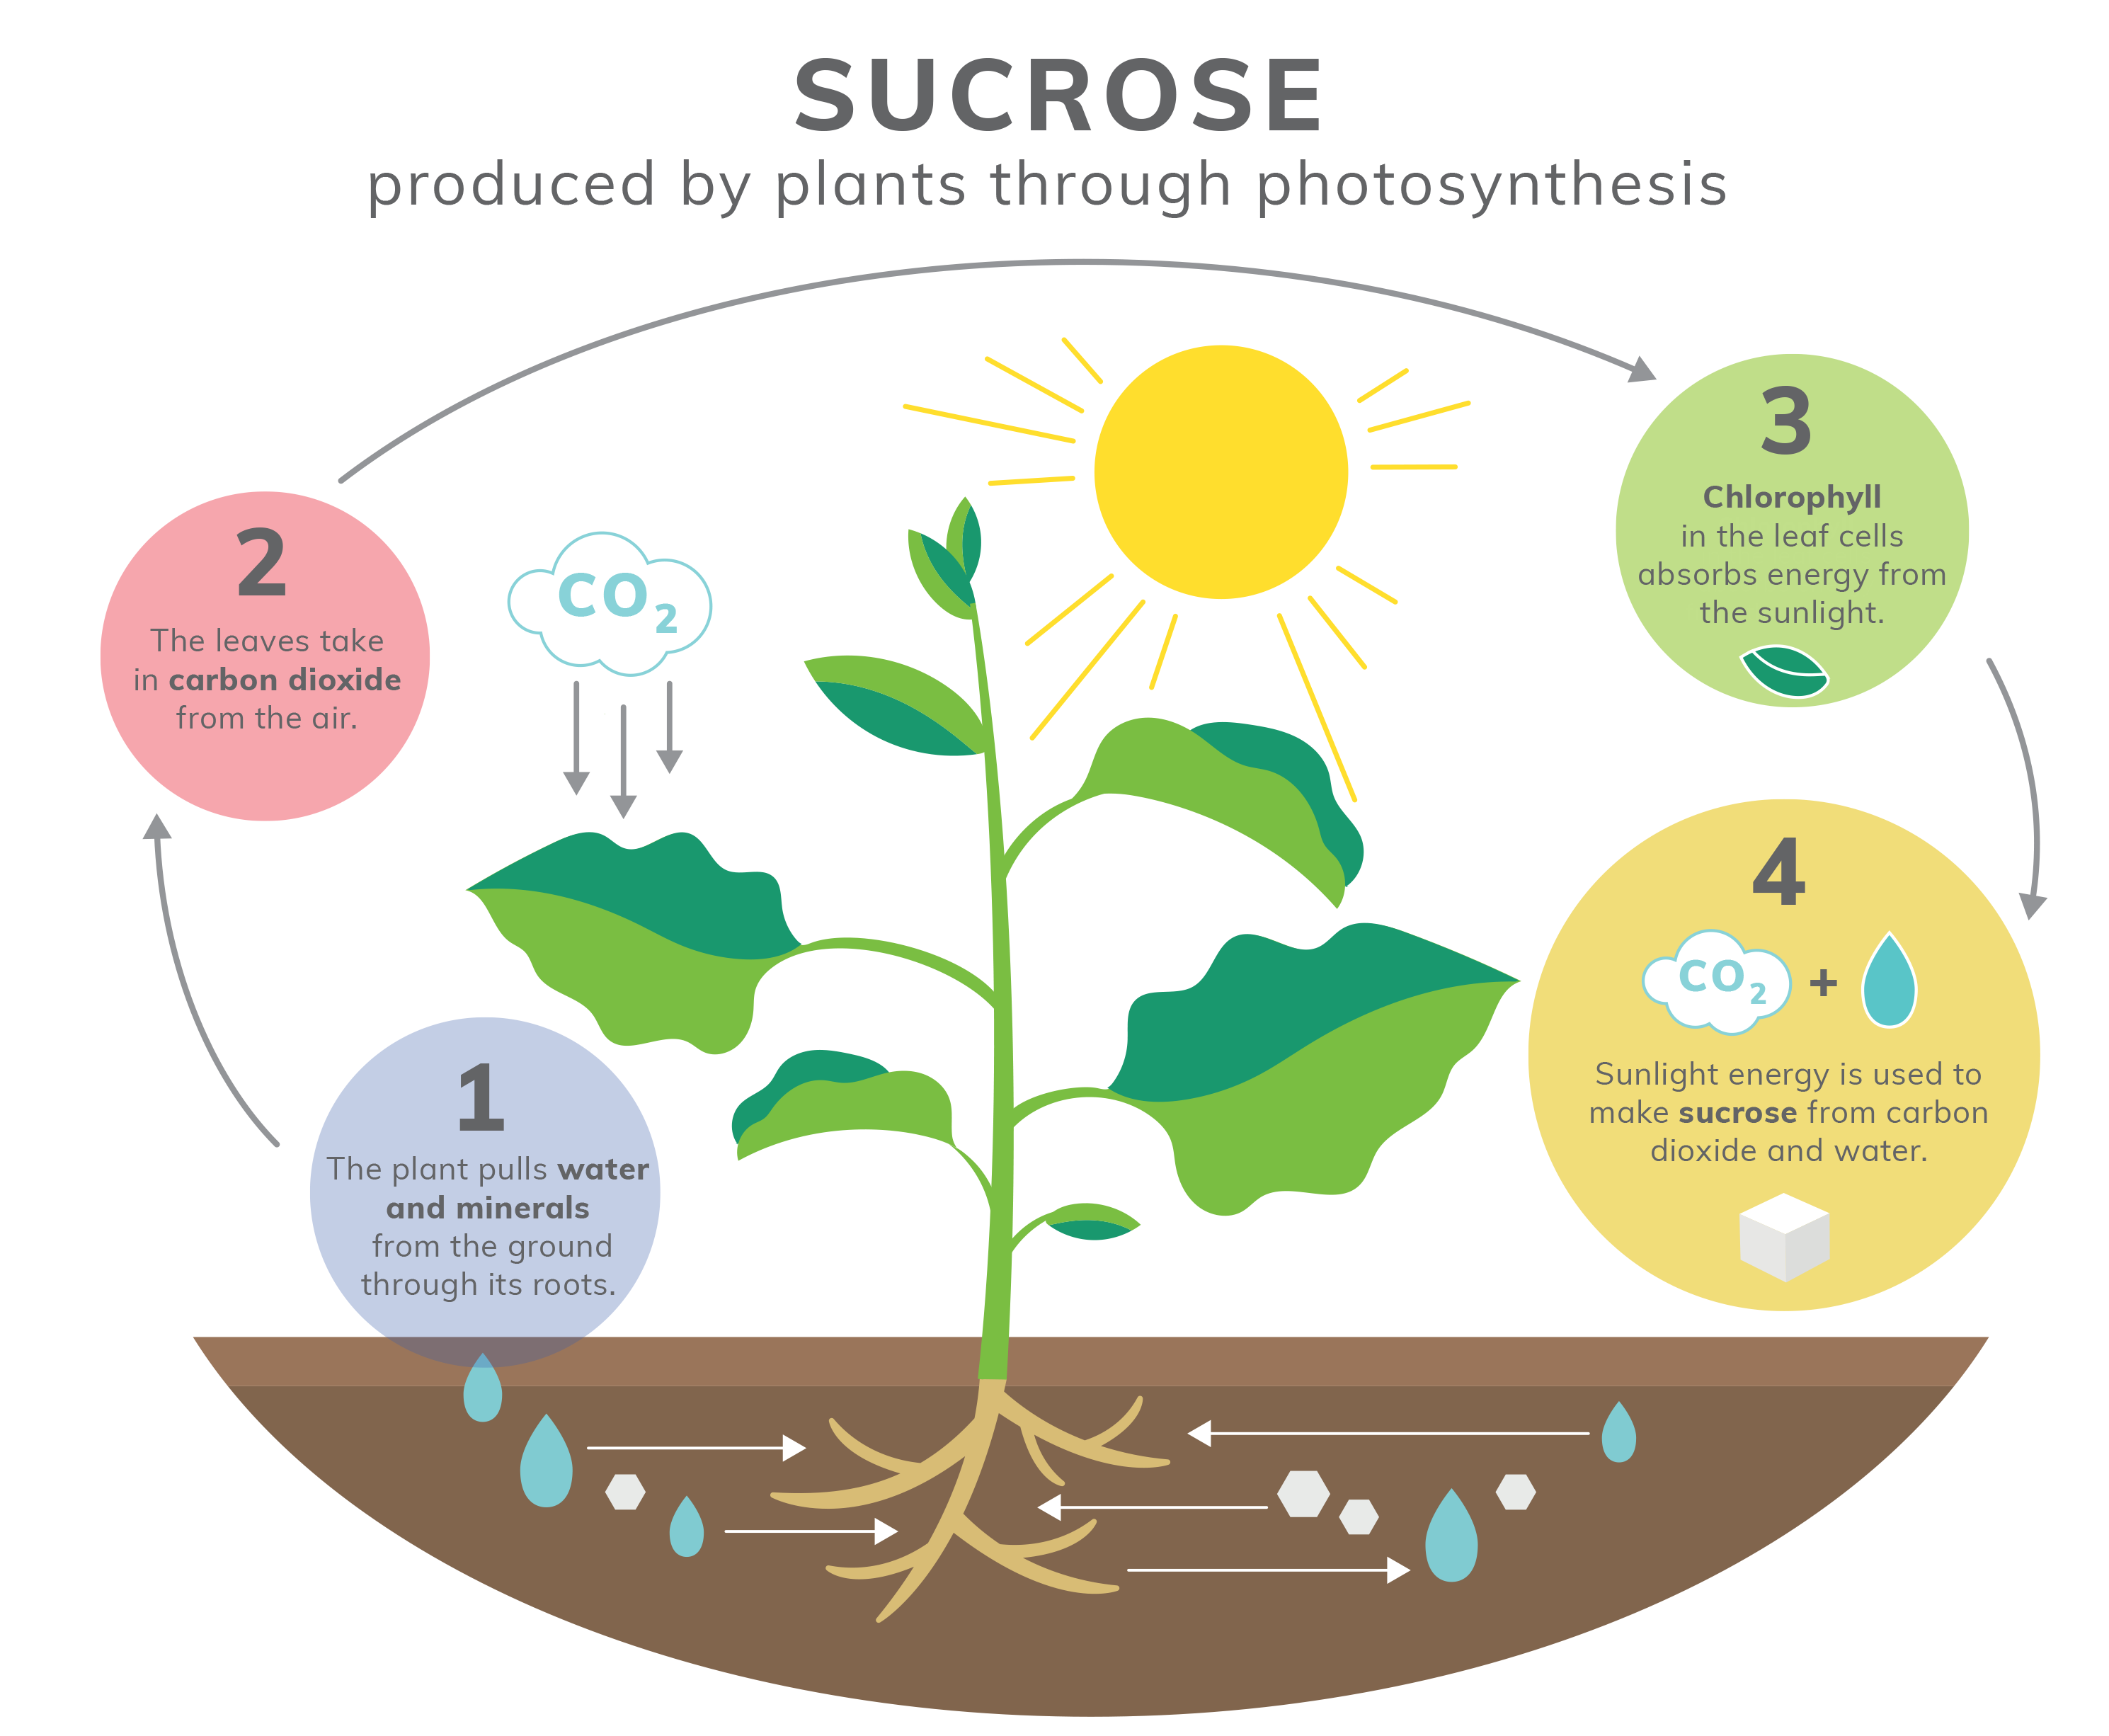 SUCROSE - produced by plants through photosynthesis